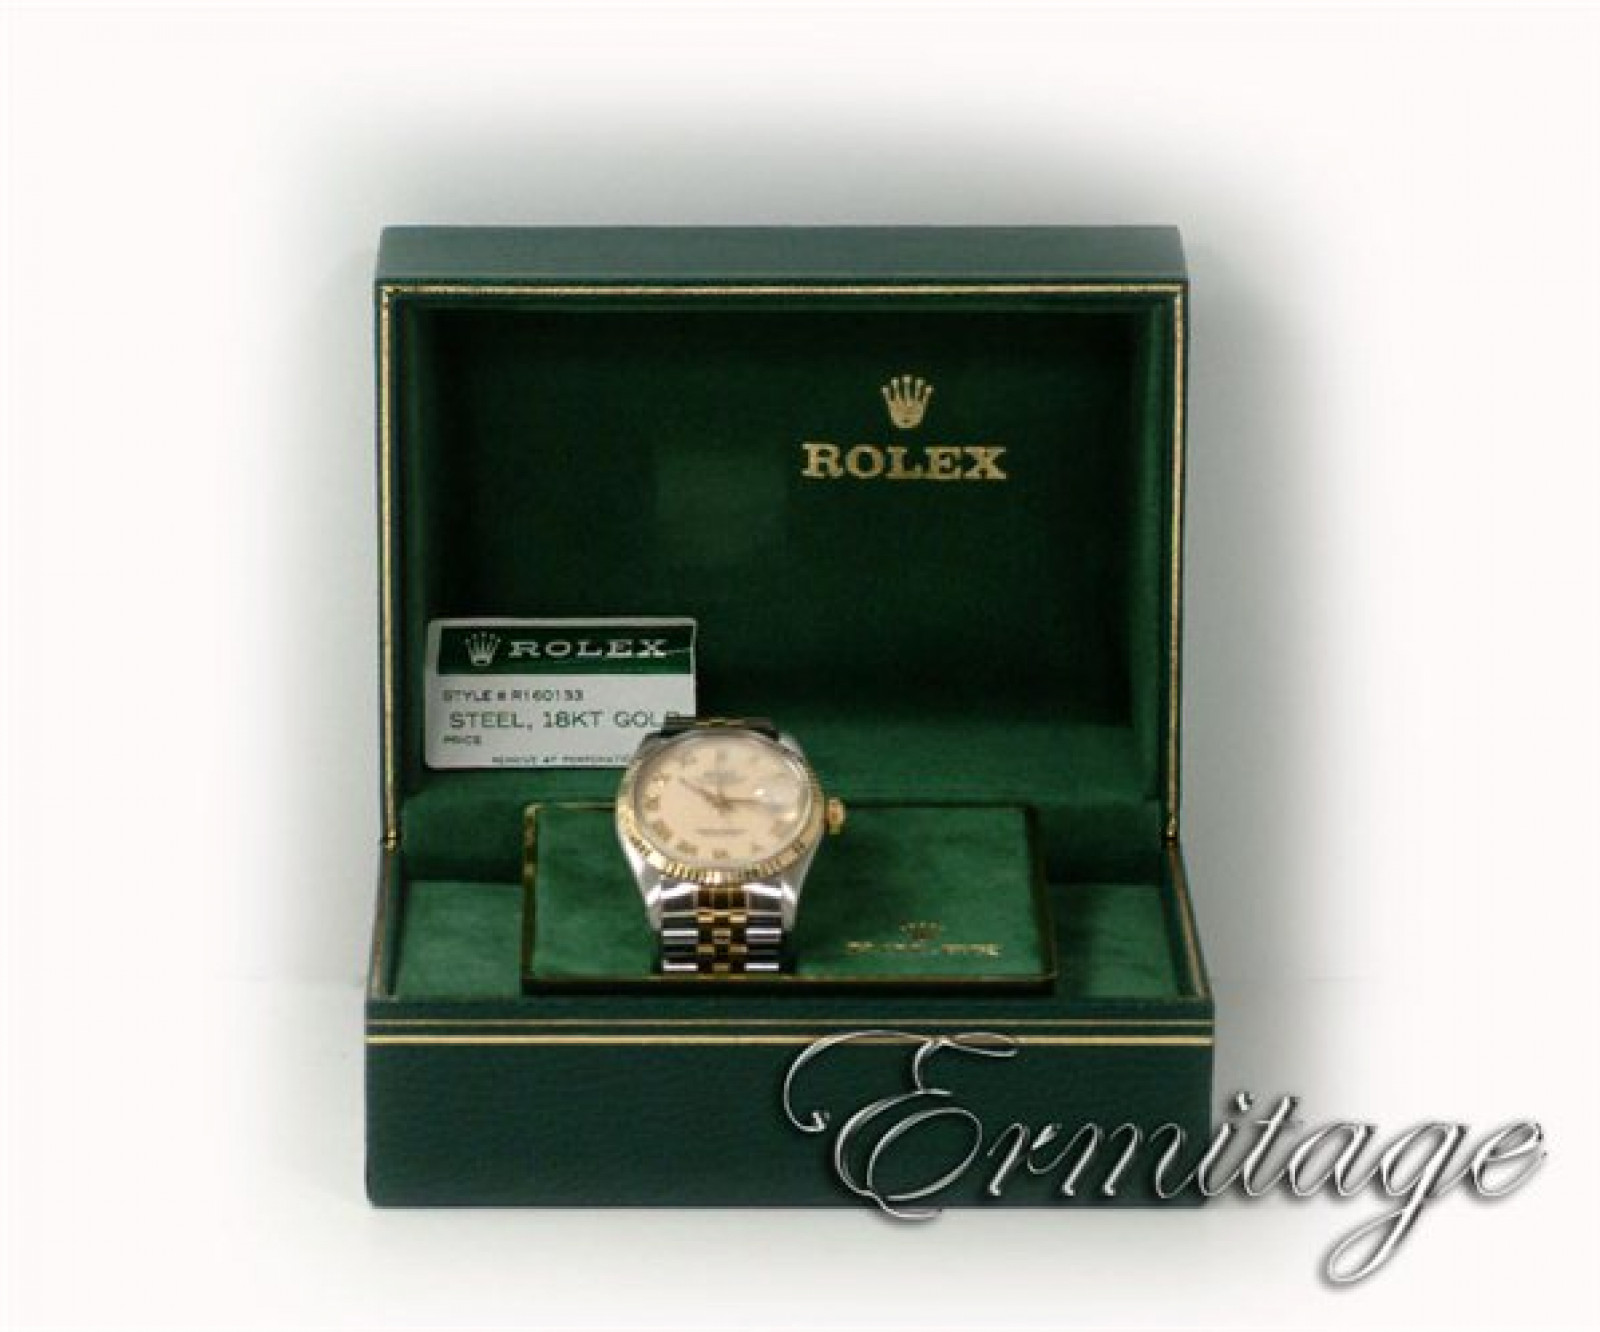 Rolex Datejust 16013 Gold & Steel with Ivory Dial